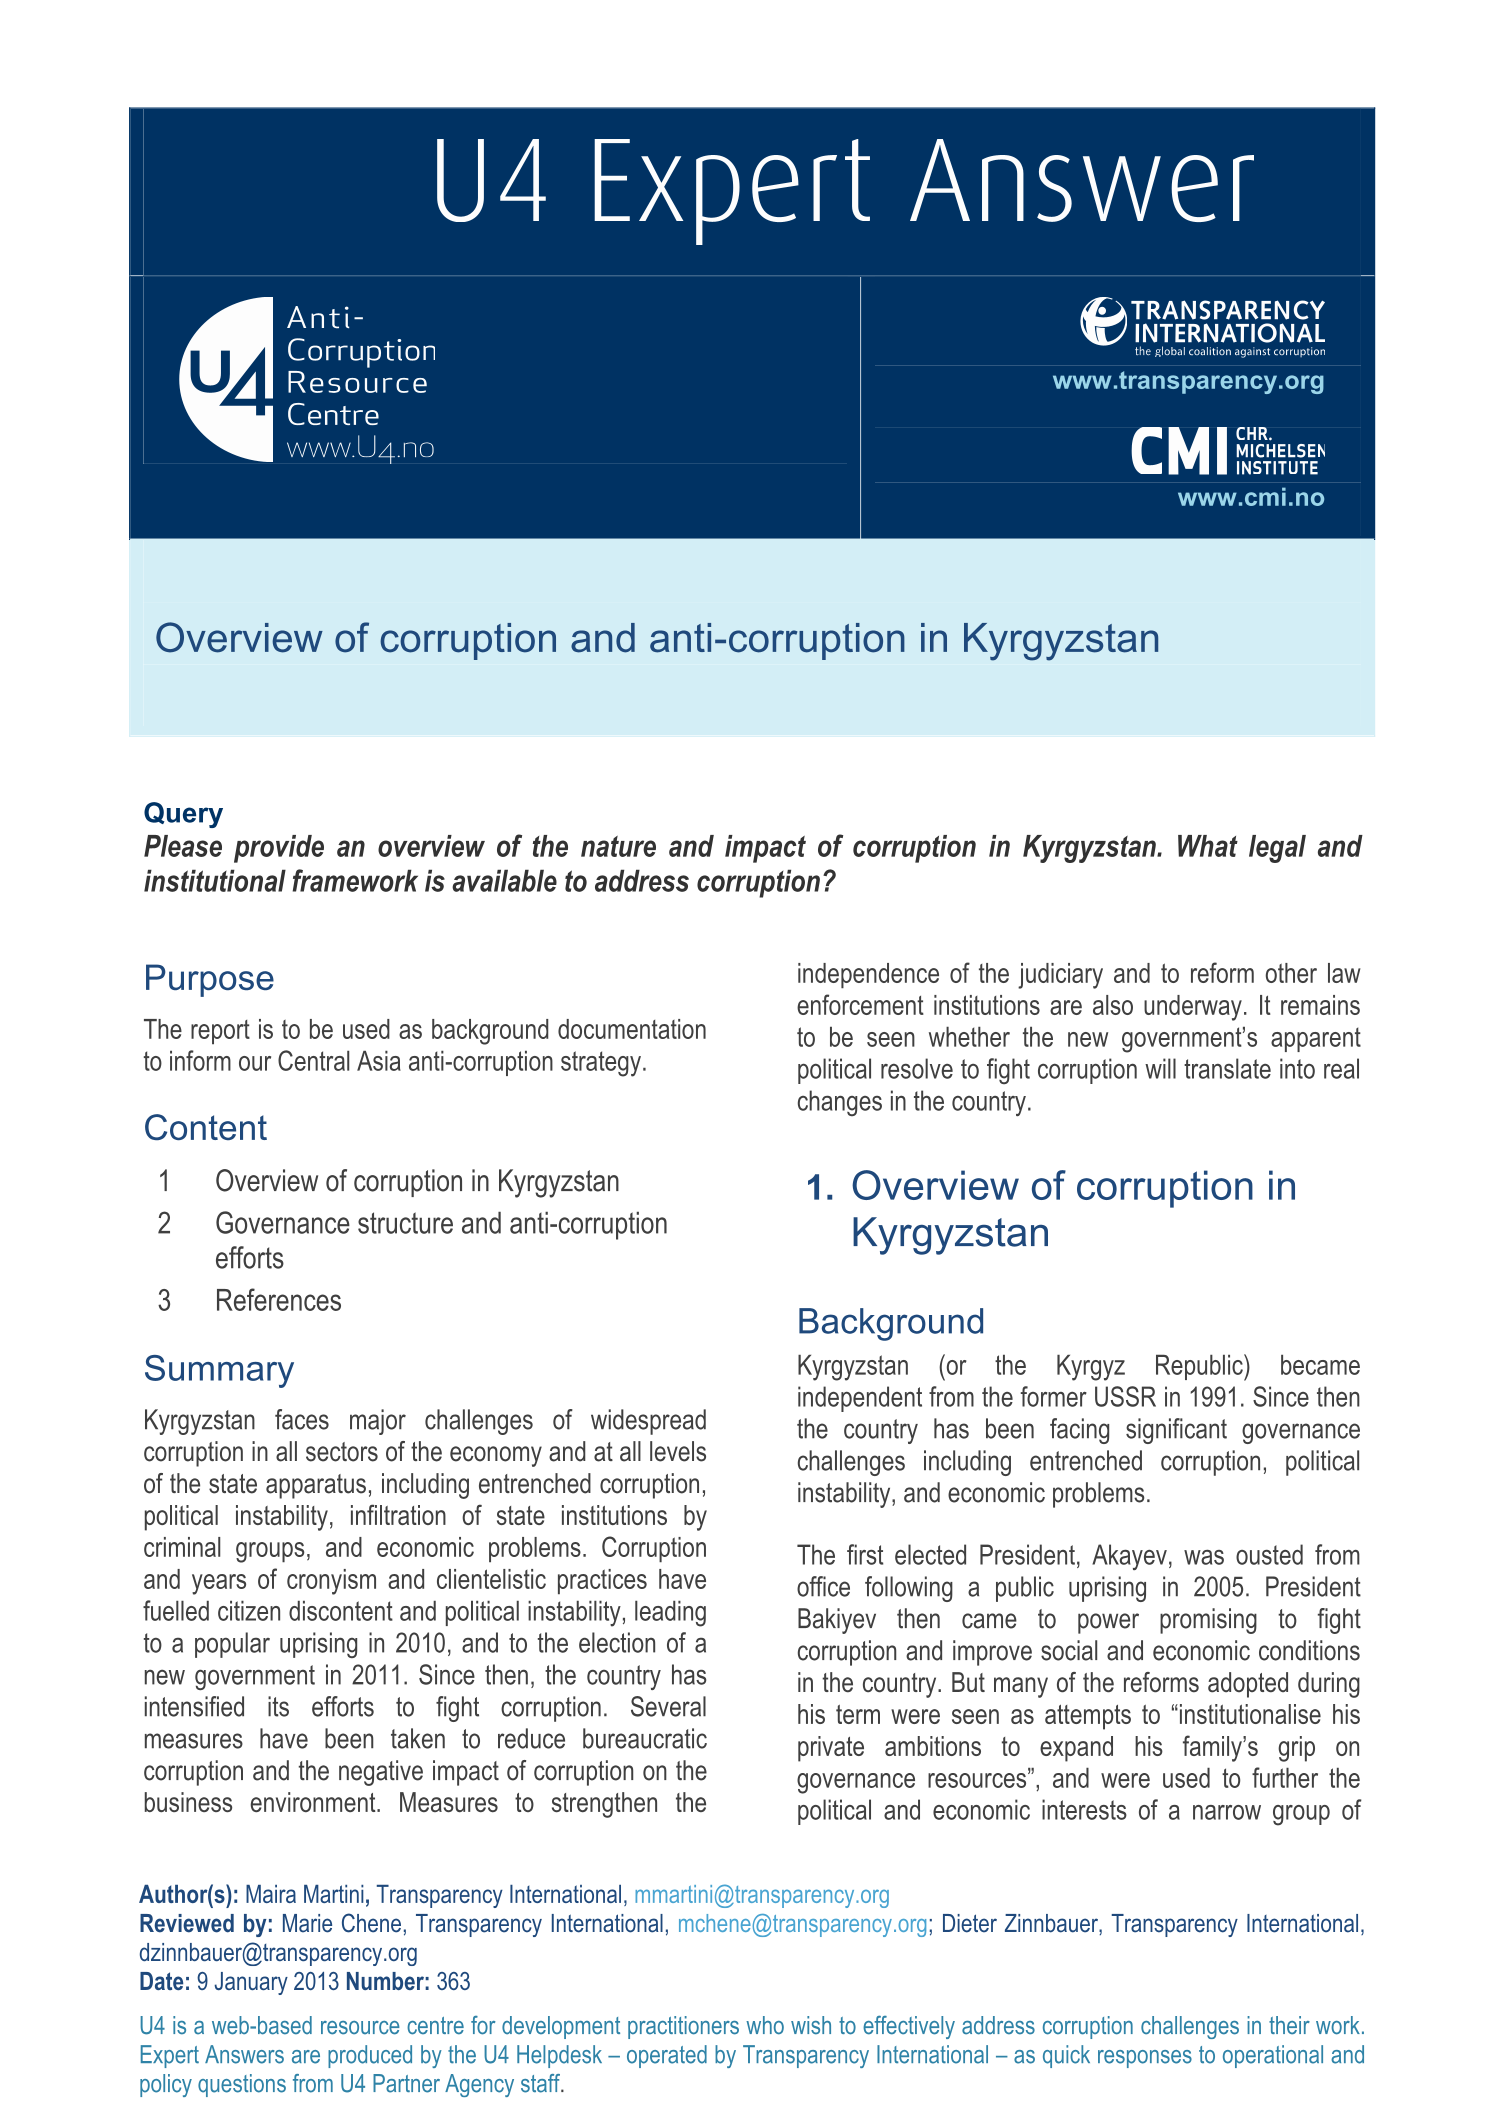 Overview of corruption and anti-corruption in Kyrgyzstan